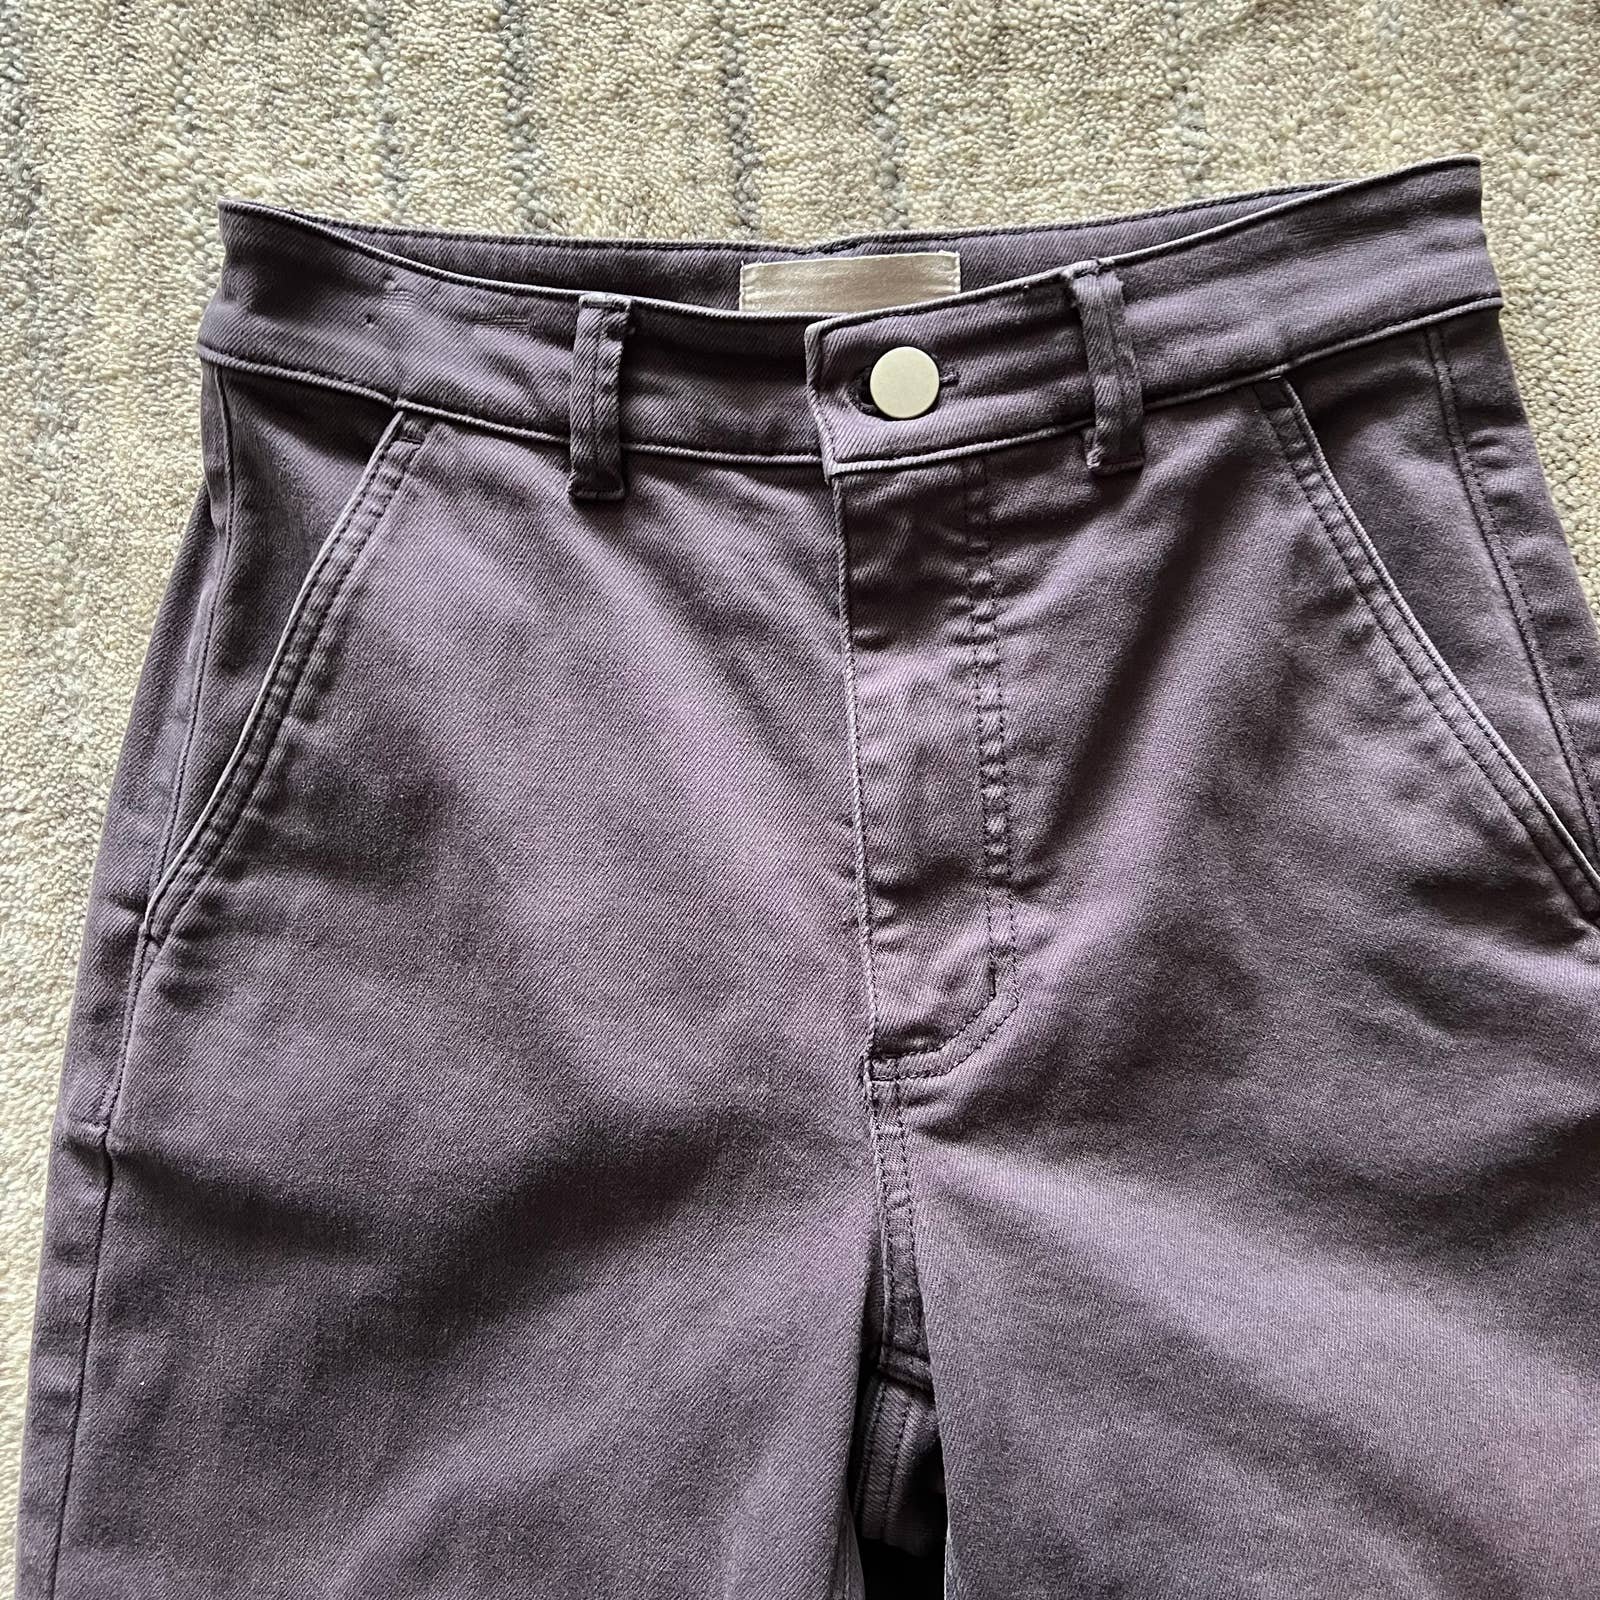 the Lowest price Everlane The Straight Leg Crop Jeans Pants Cropped High Rise Shadow Purple 2 25 PoR45dXEH US Outlet